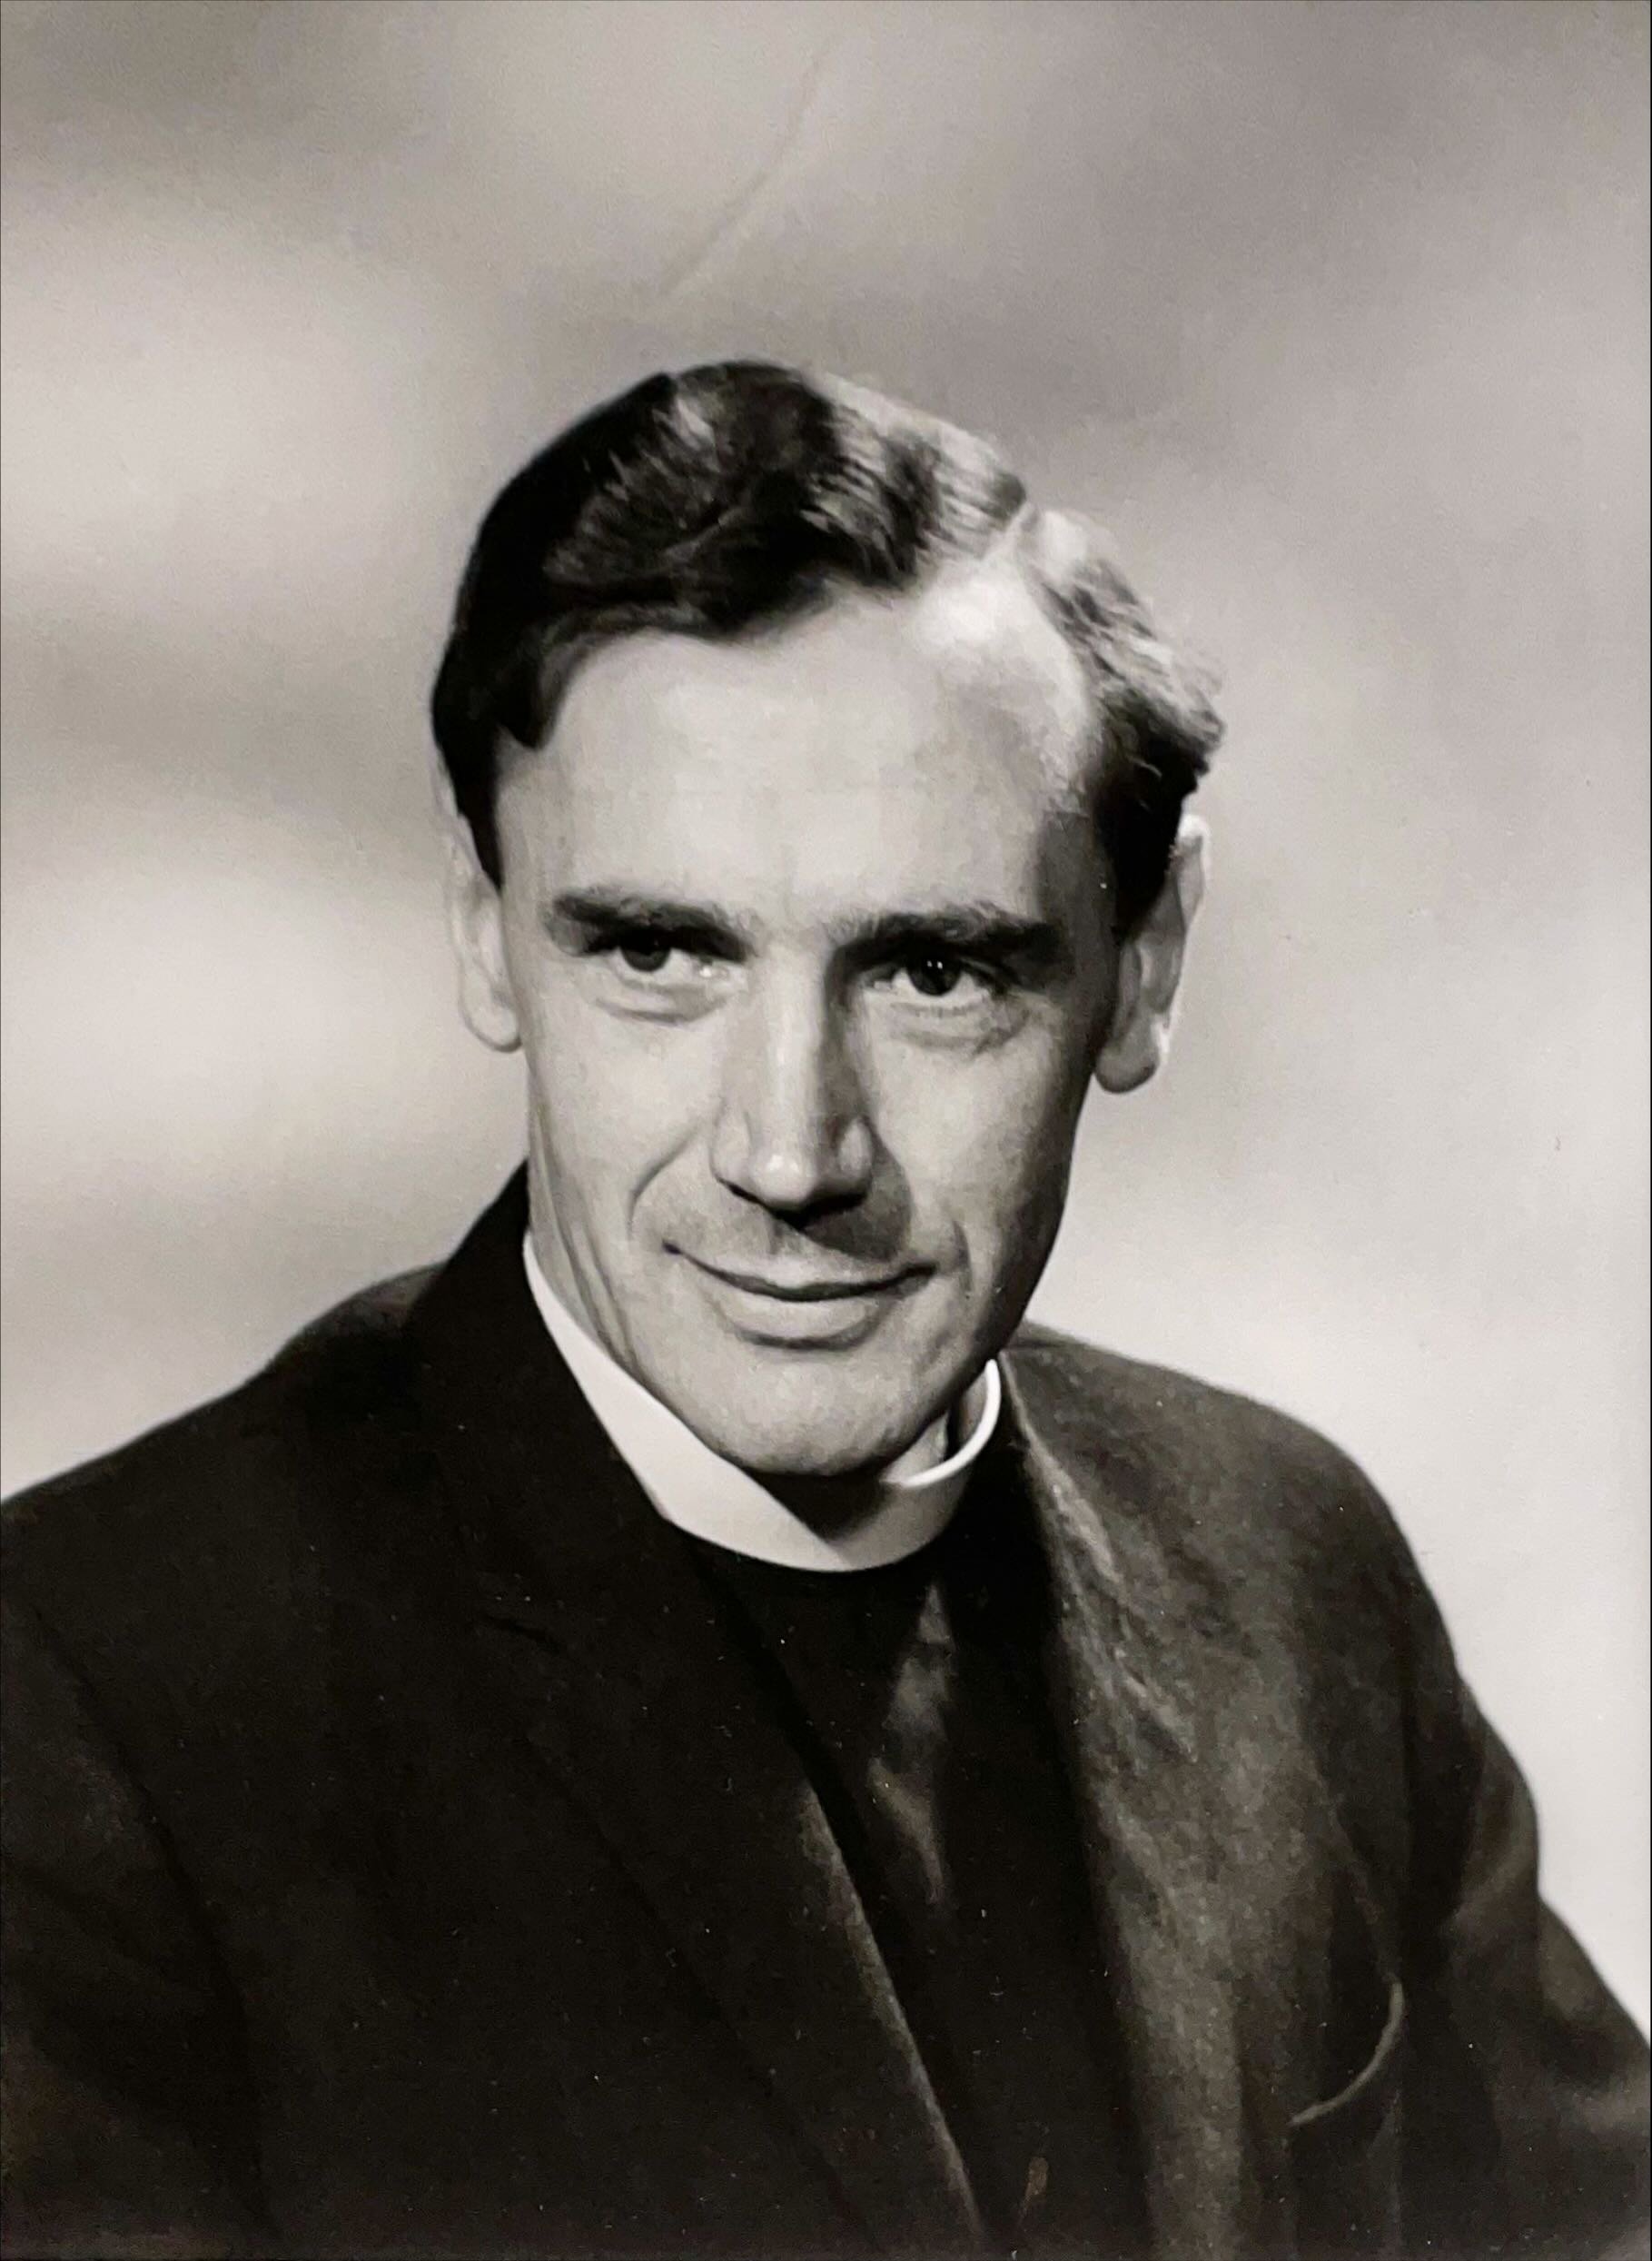 Revd. Alan Robson, Rochester Theological College 1958-1970